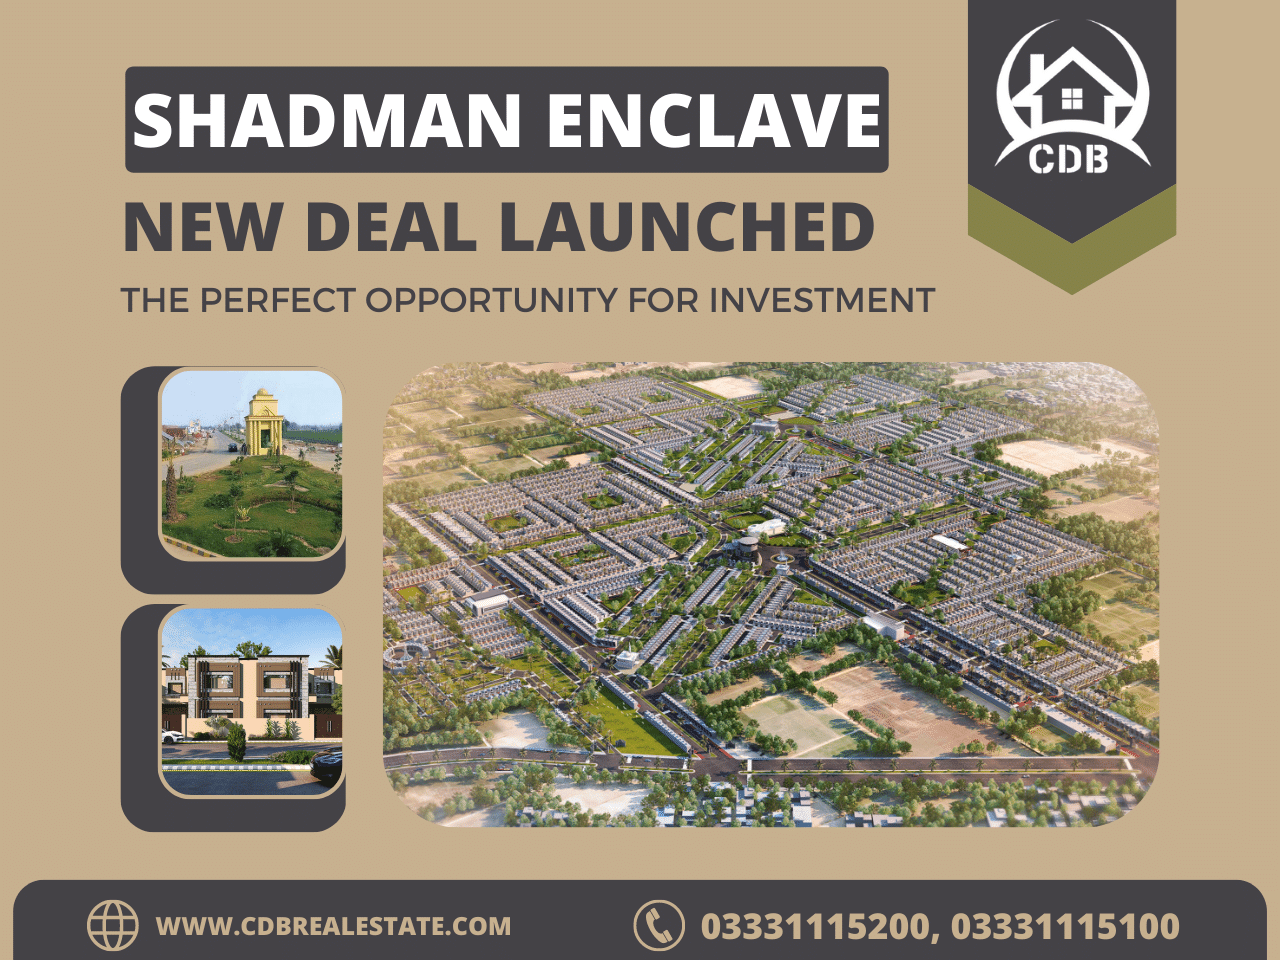 Shadman Enclave New Deal